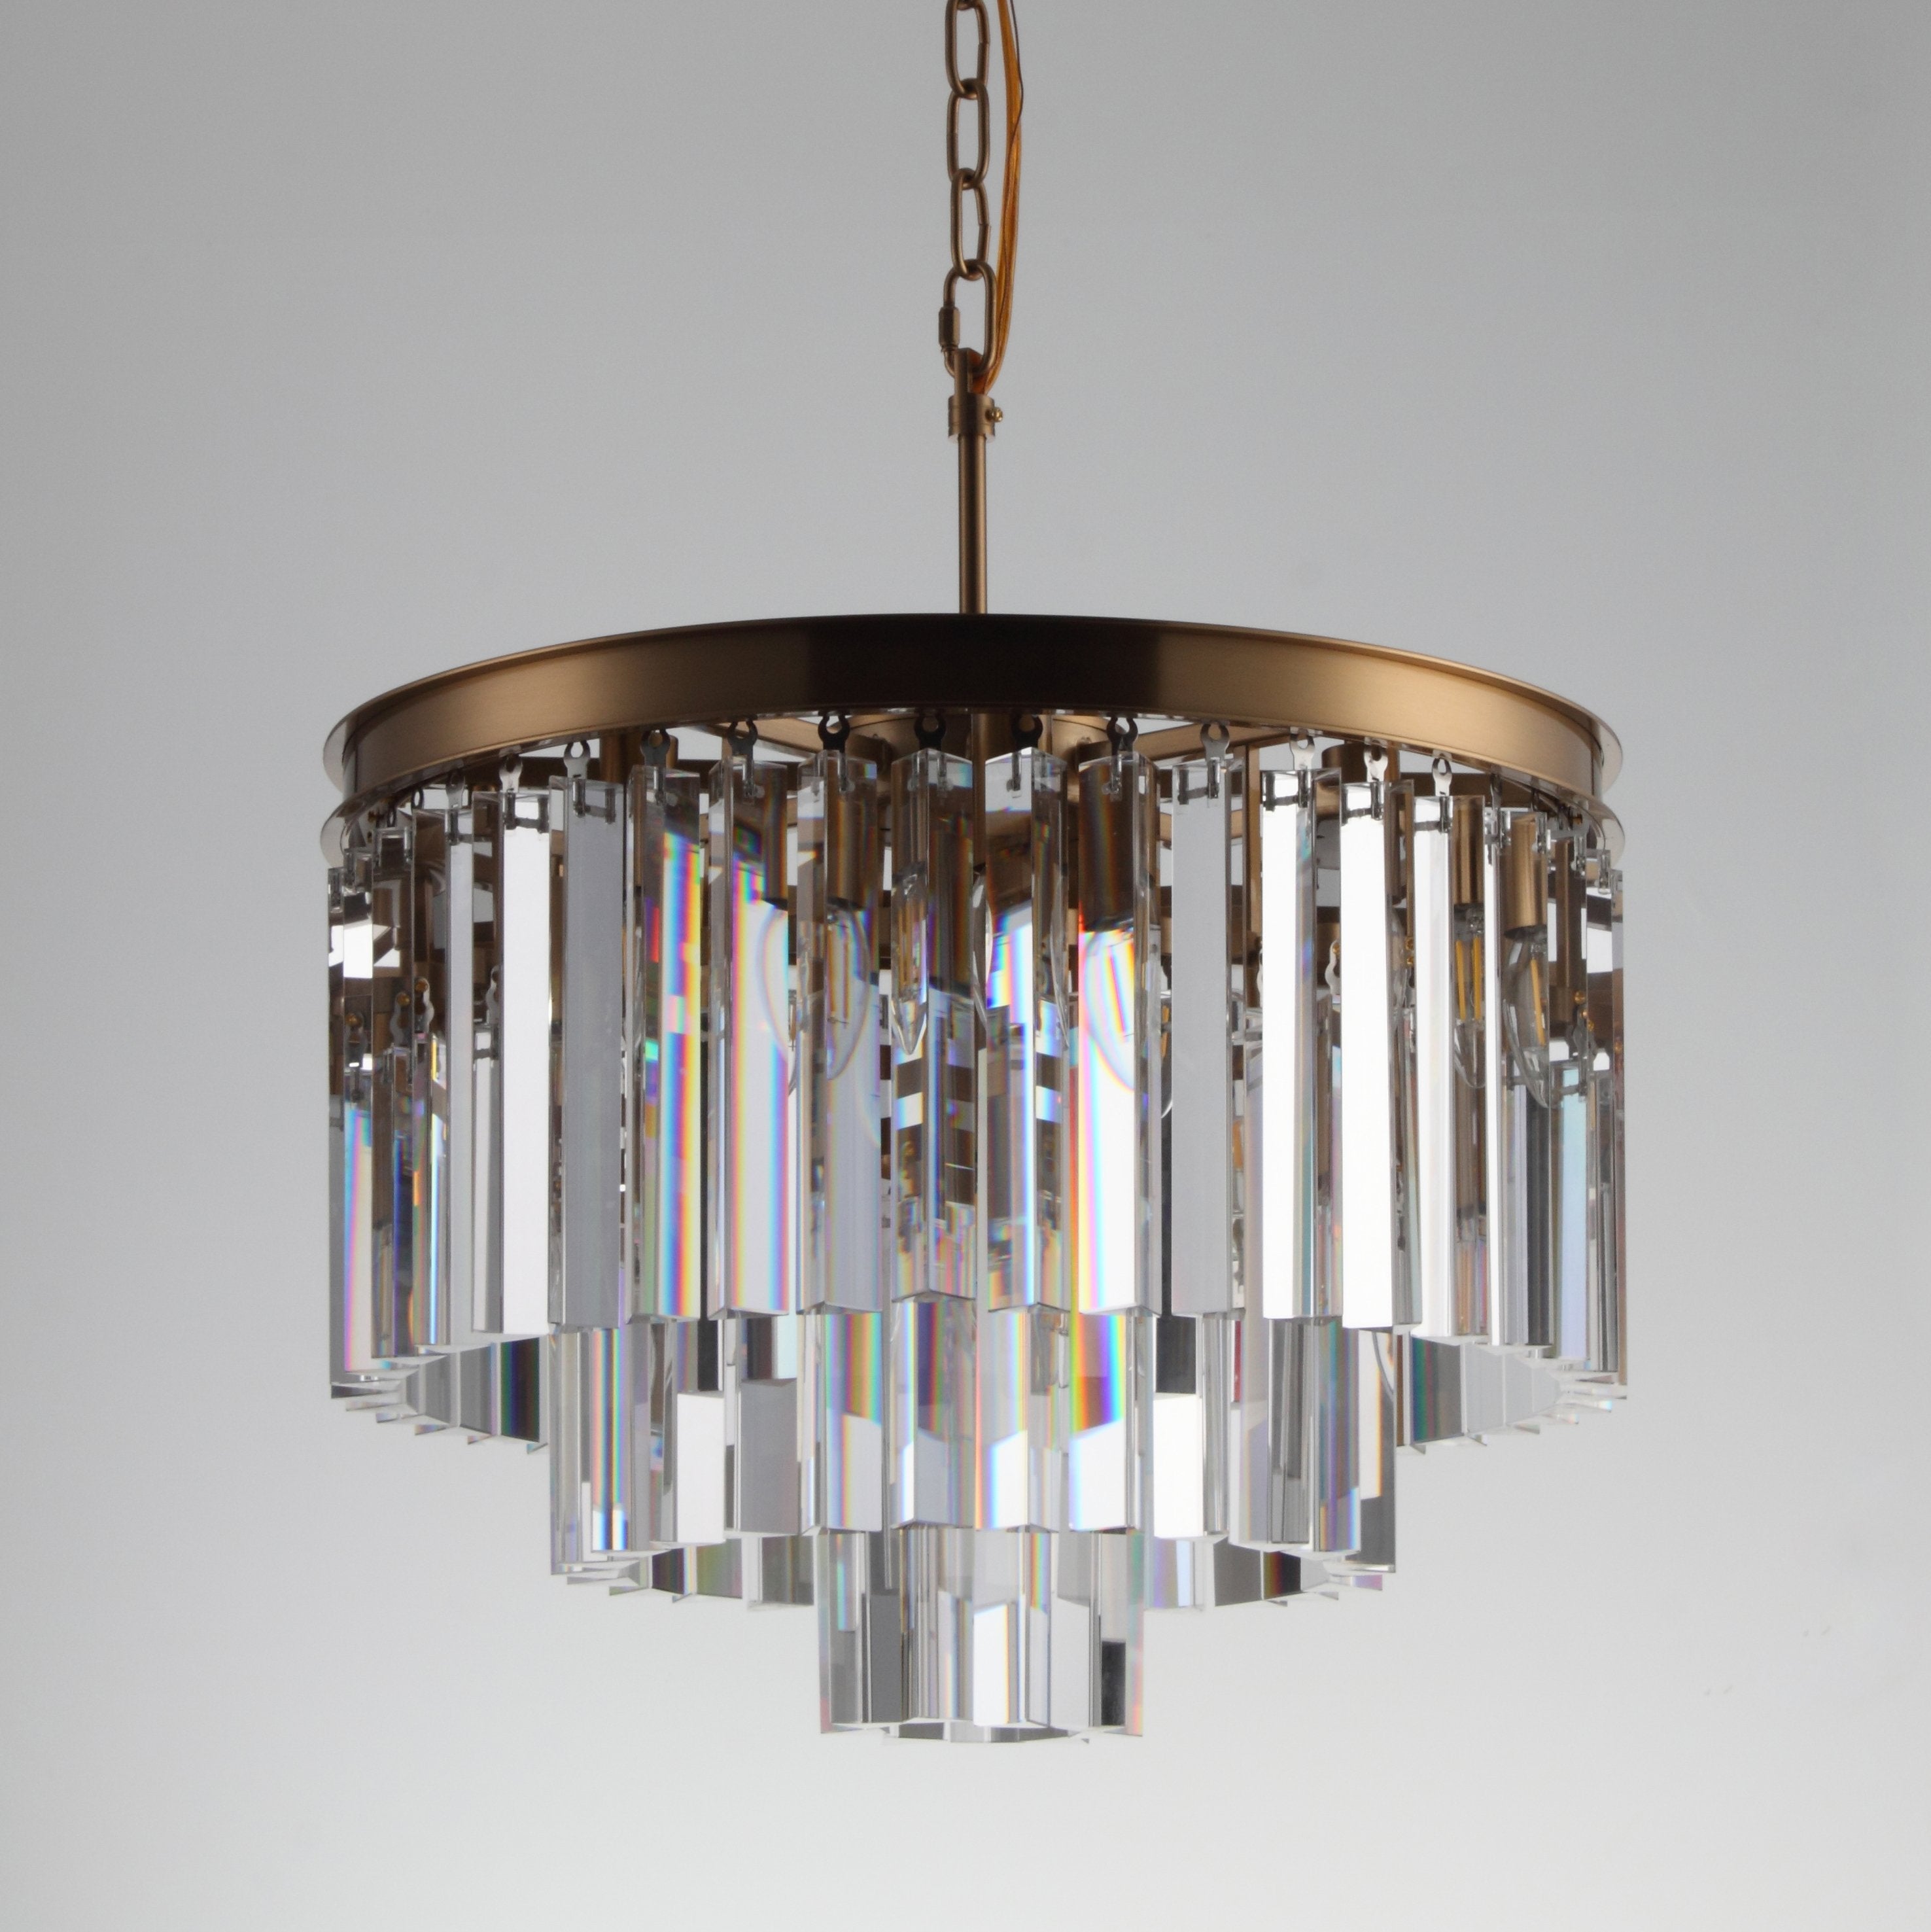 Apex Odeon Round Crystal Fringe Chandelier Collection - Italian Concept - 